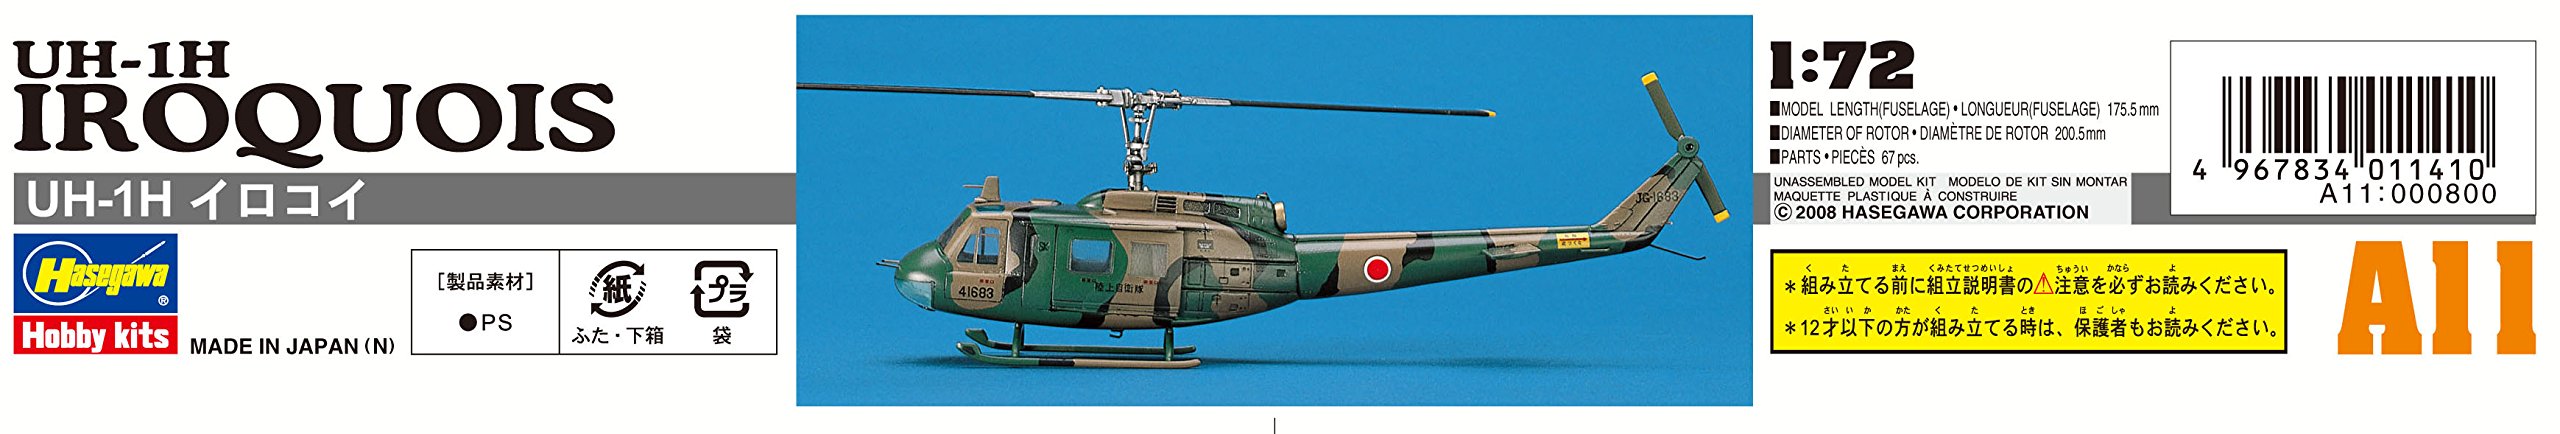 HASEGAWA - 1/72 Bell Uh-1H Iroquois - U.S. Army/J.G.S.D.F. Utility Helicopter Plastic Model